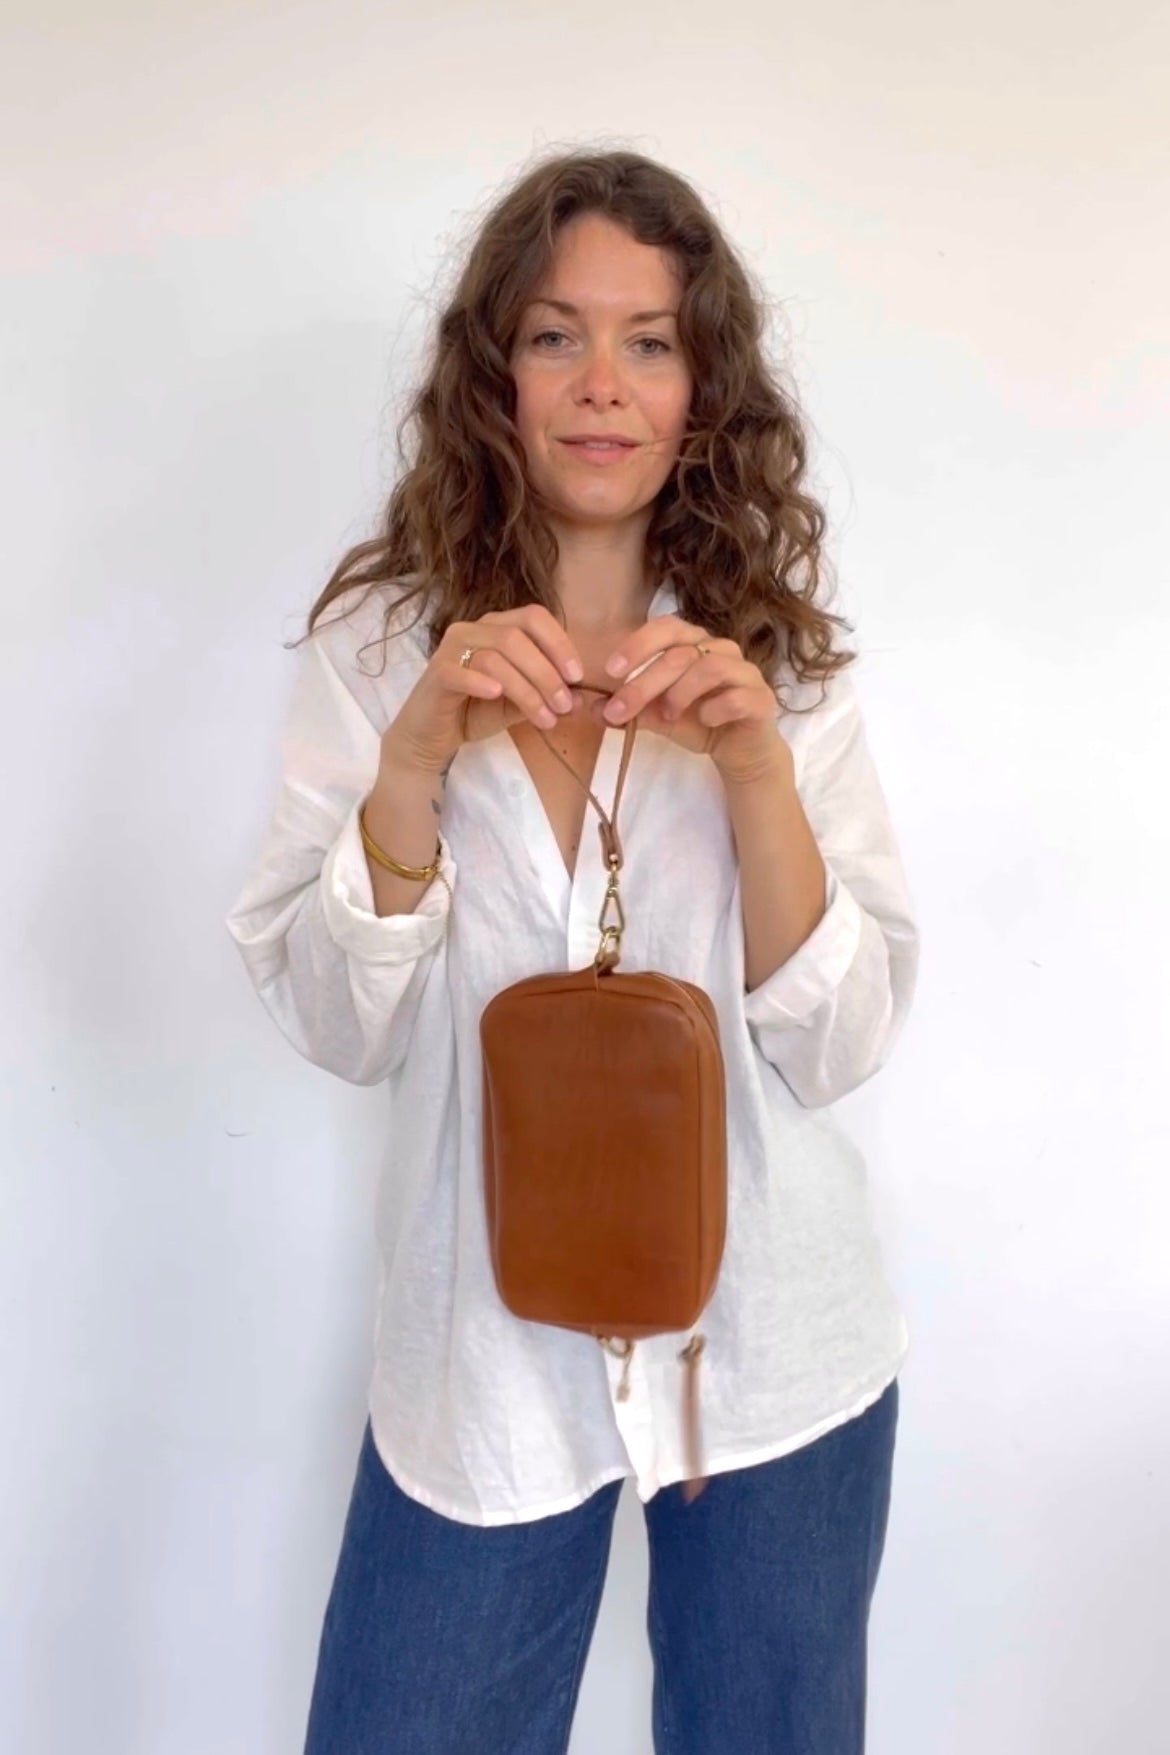 Leather Day to Night Bag In Caramel Leather Bag - handcrafted by Market Canvas Leather in Tofino, BC, Canada